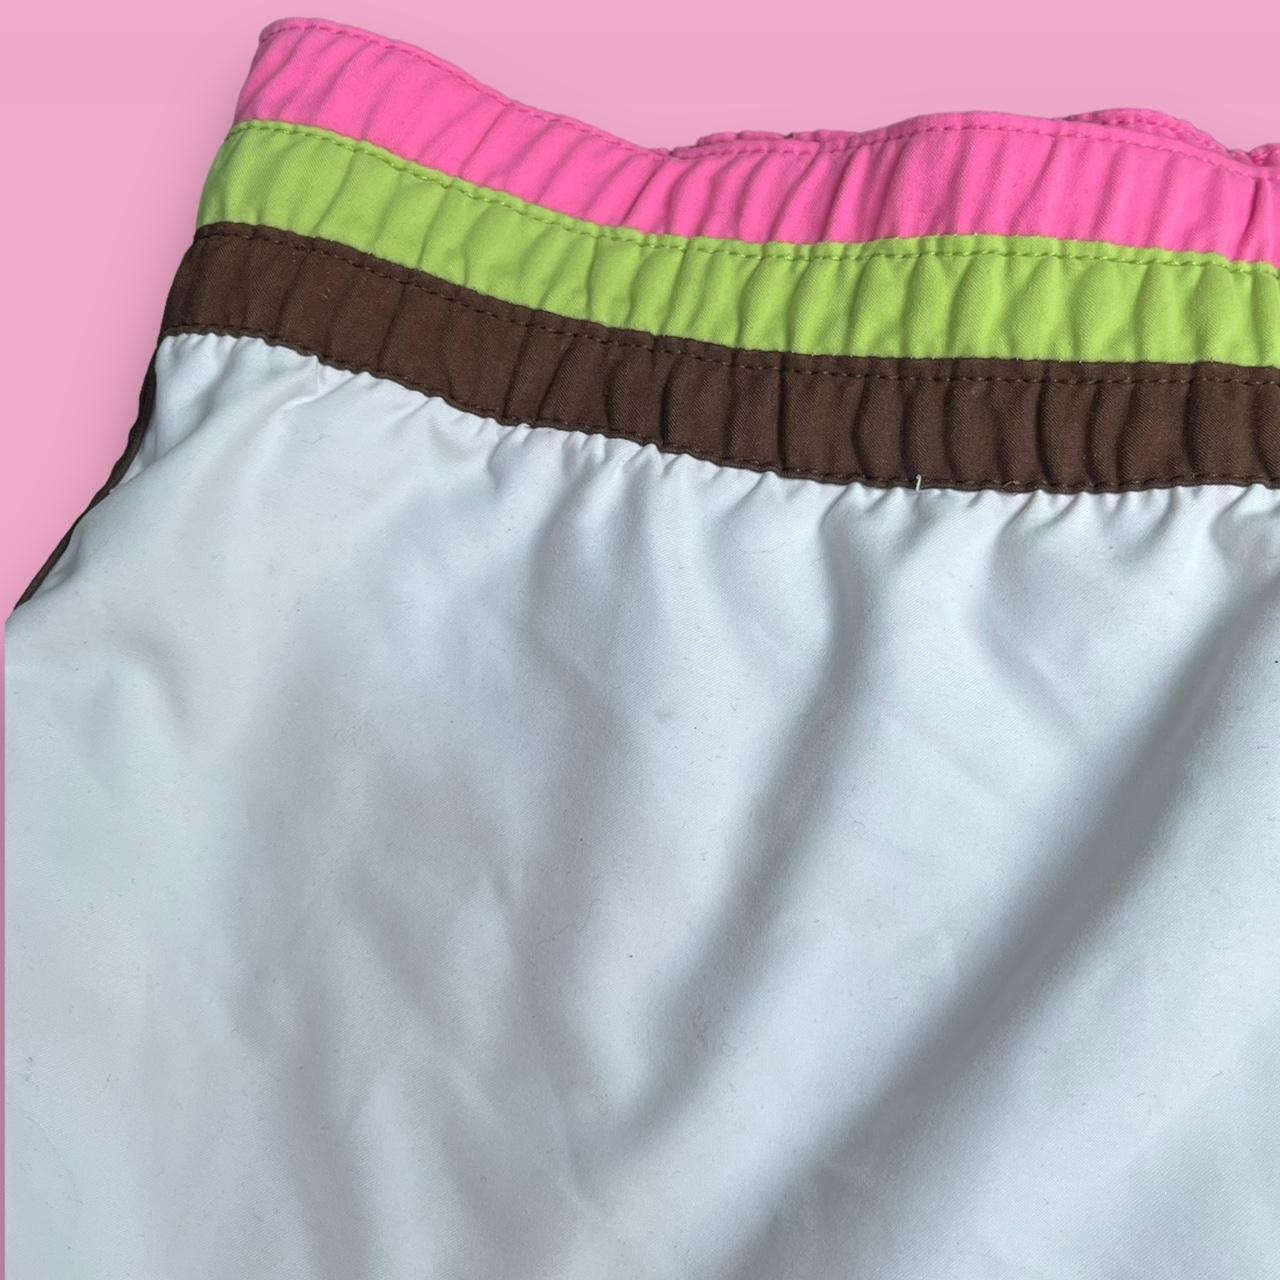 Roxy Women's White and Pink Shorts (5)